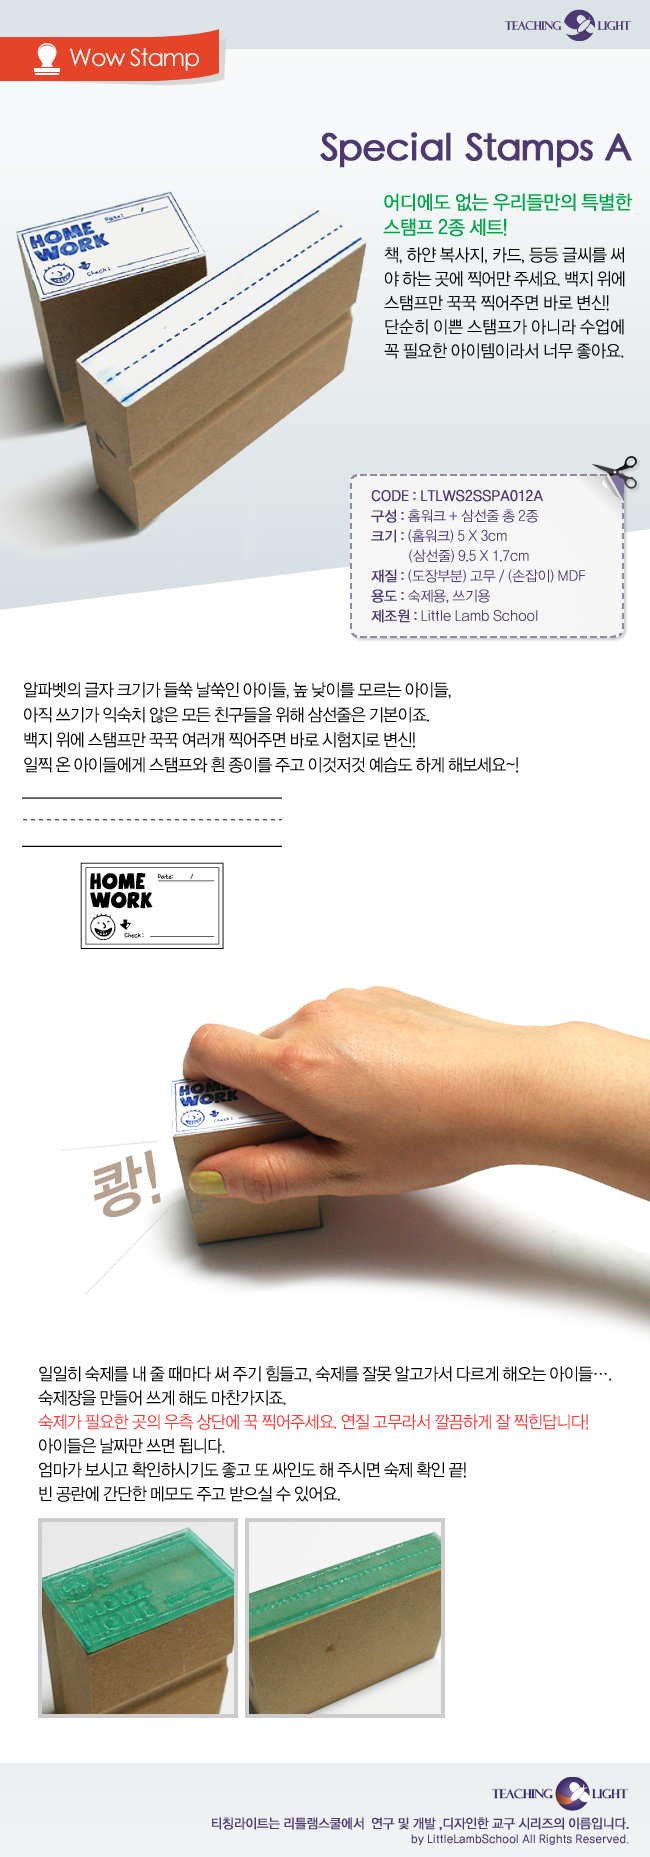 [stamp] 스페셜스탬프 A (도장 2개 세트)/ (Special Stamps_A) 